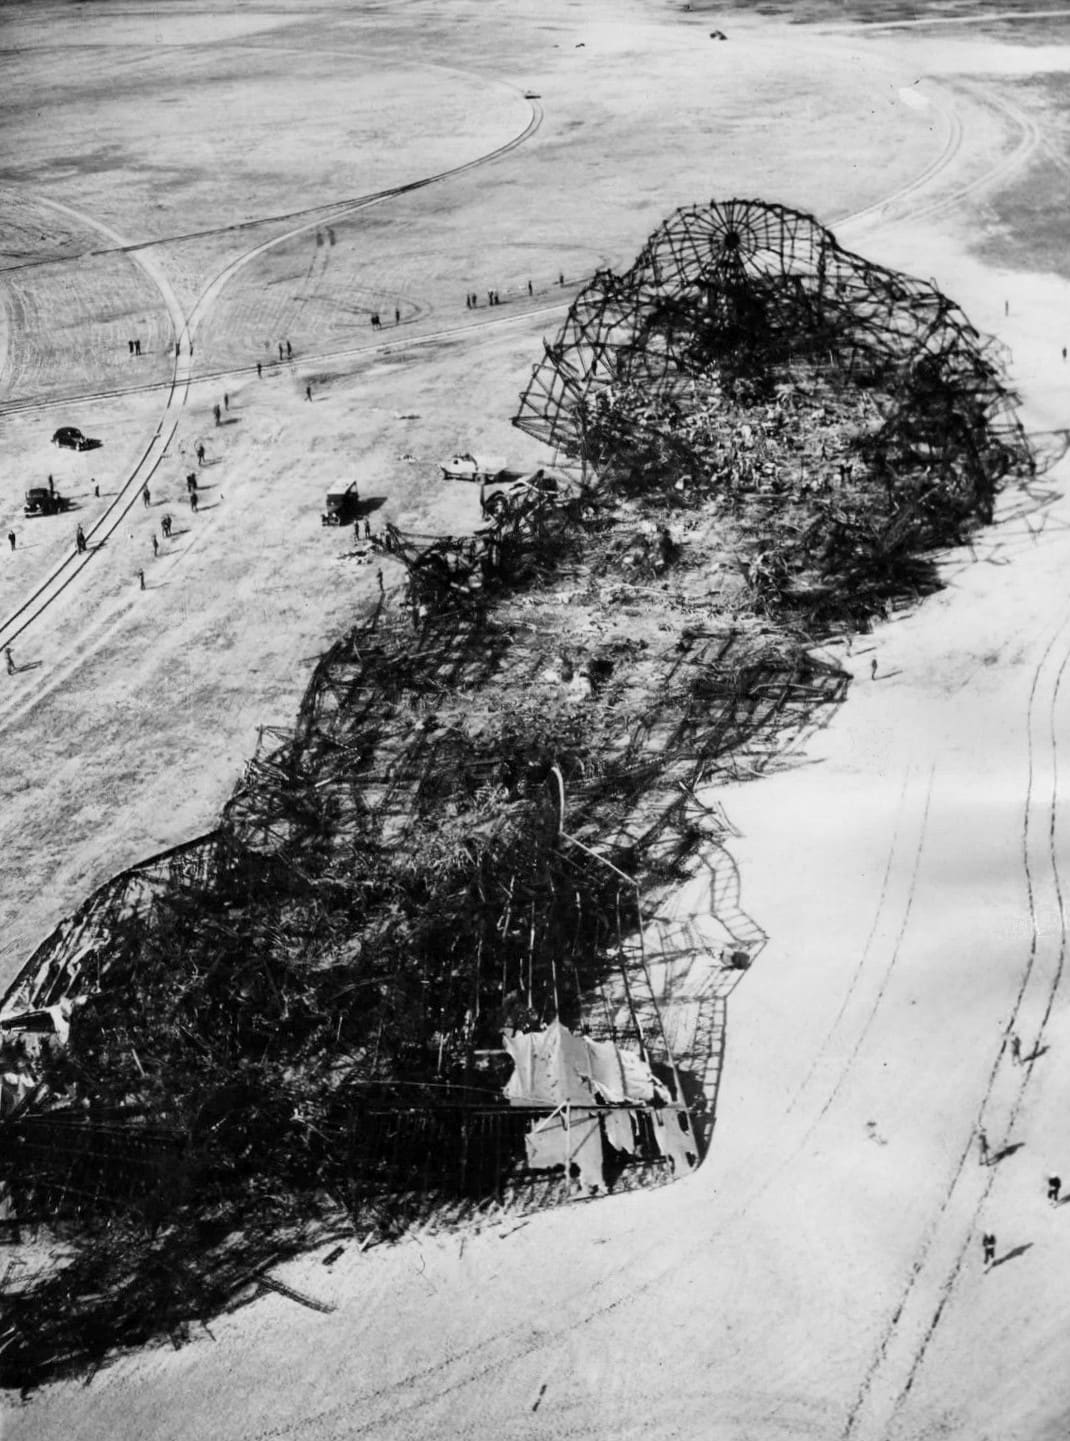 May 1937: Wreckage from the German Zeppelin Hindenburg that was destroyed during its attempt to dock at Lakehurst naval station in New Jersey, USA.